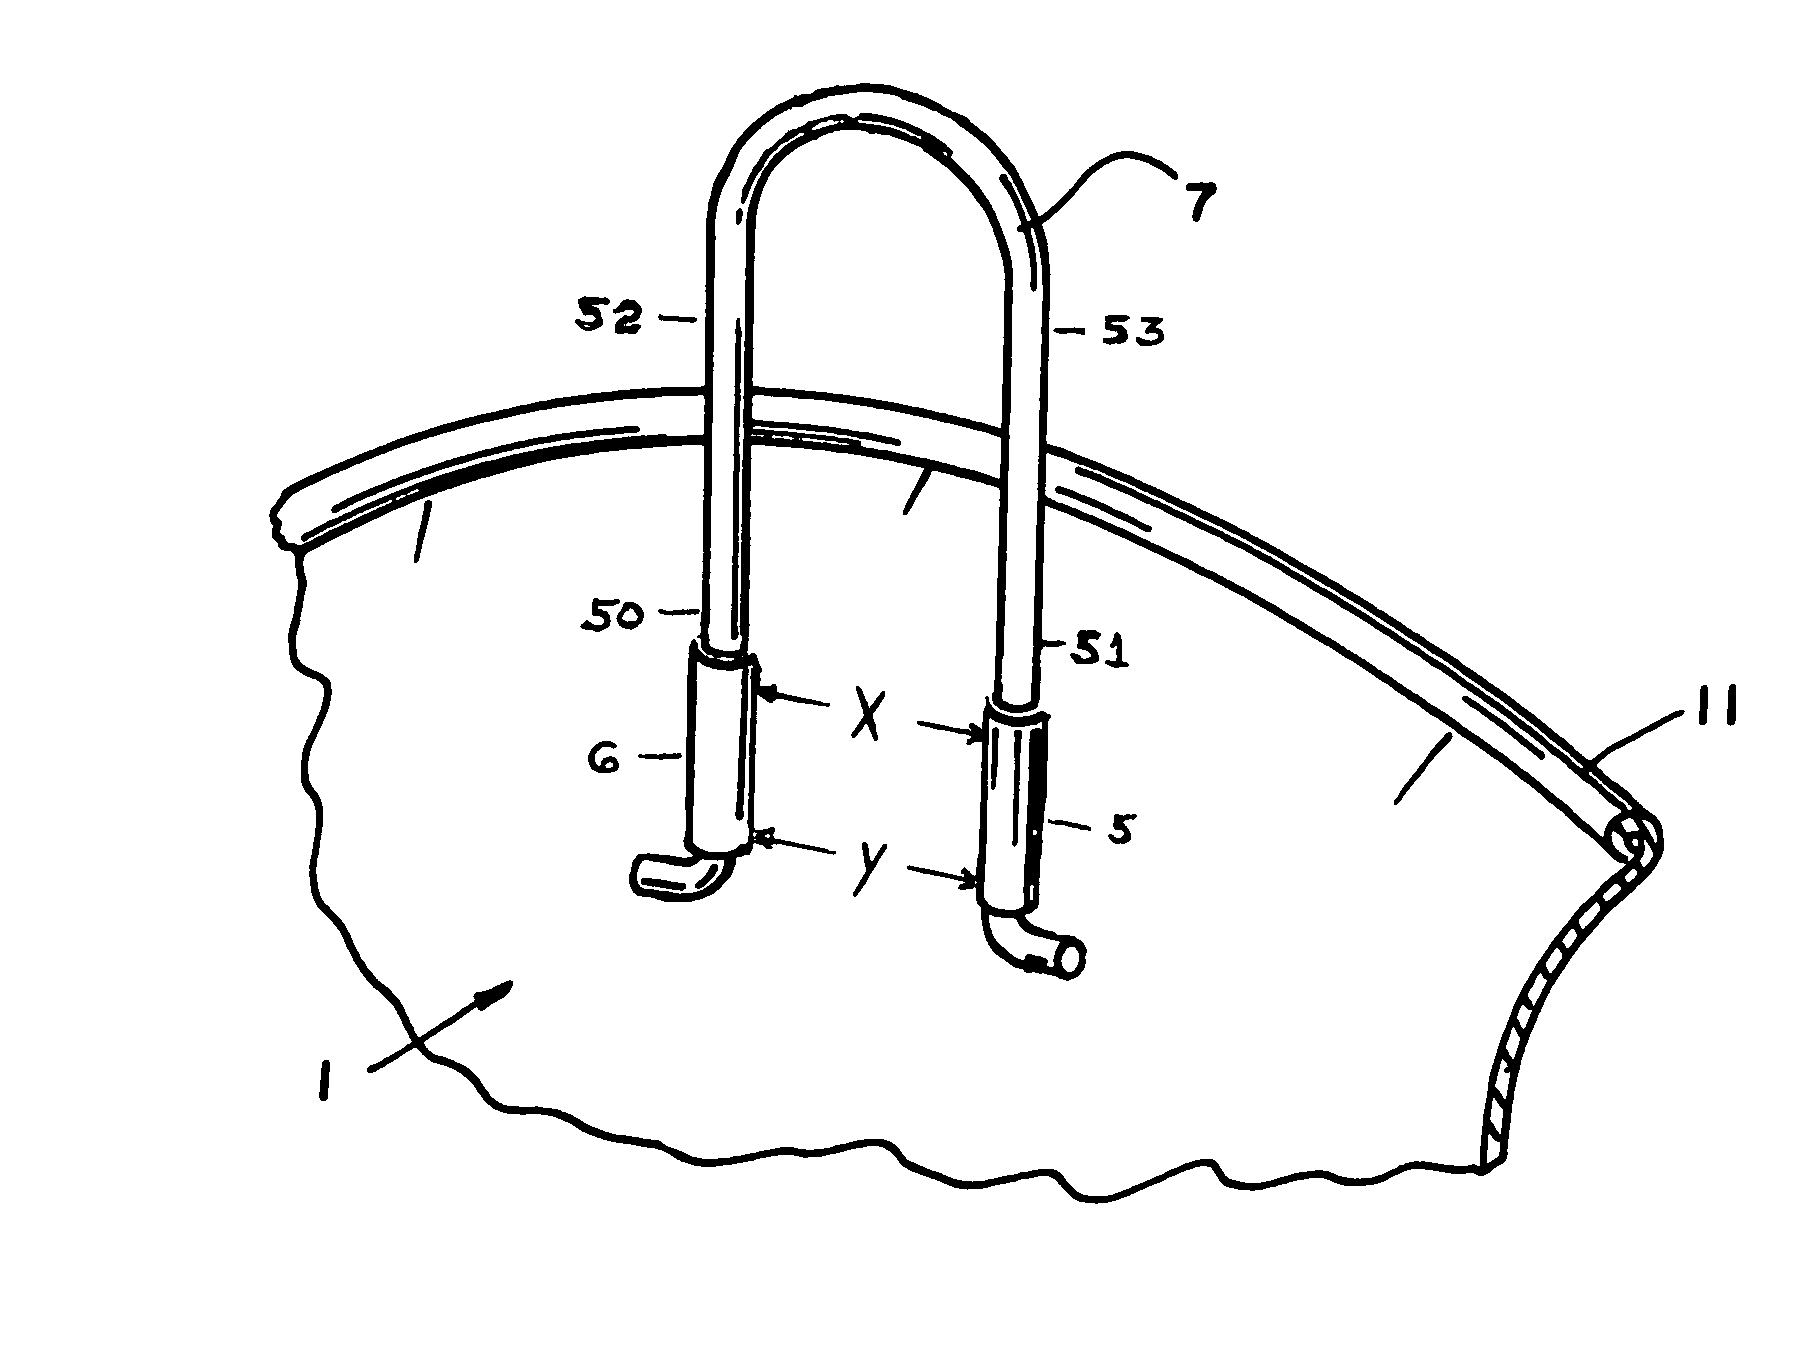 Device for implement storage